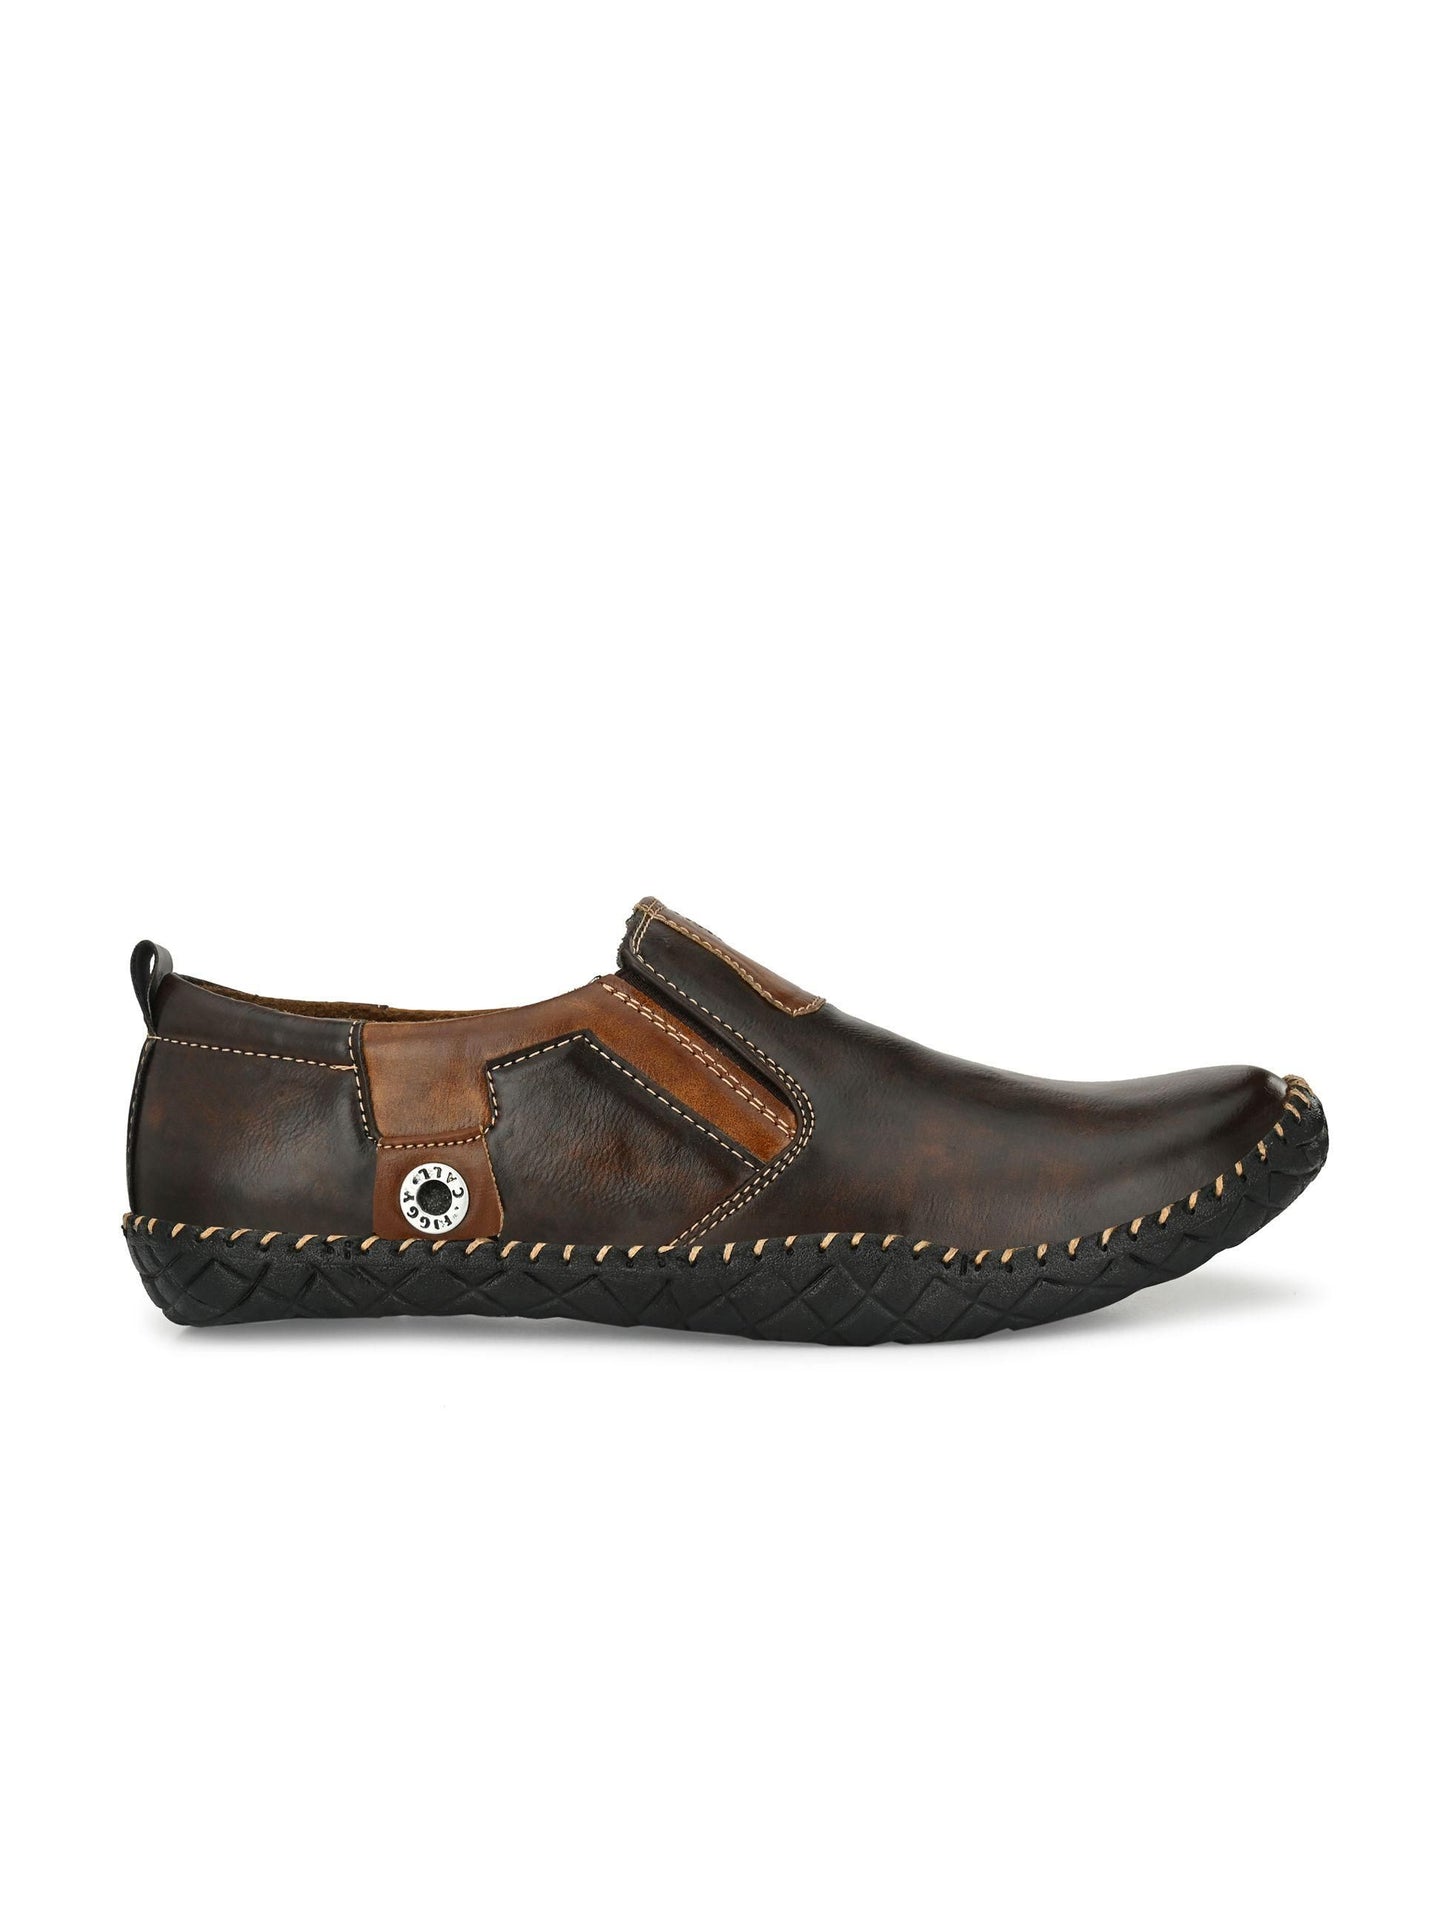 Bucik Men's Brown Synthetic Leather Slip-On Casual Shoes